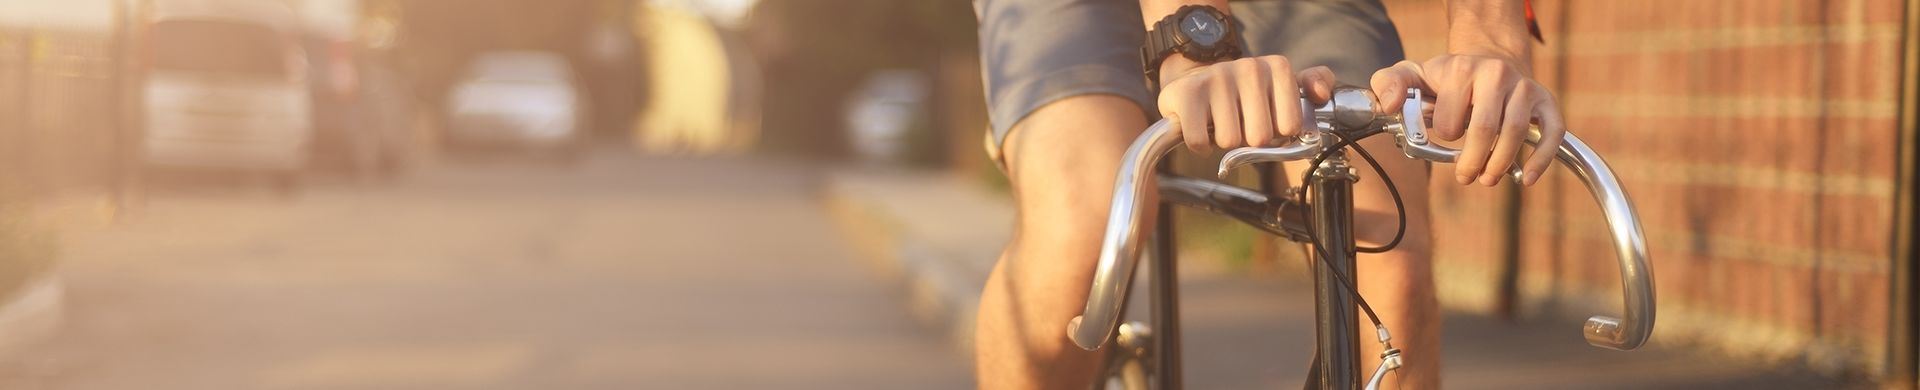 California Bicycle Accident Lawyer